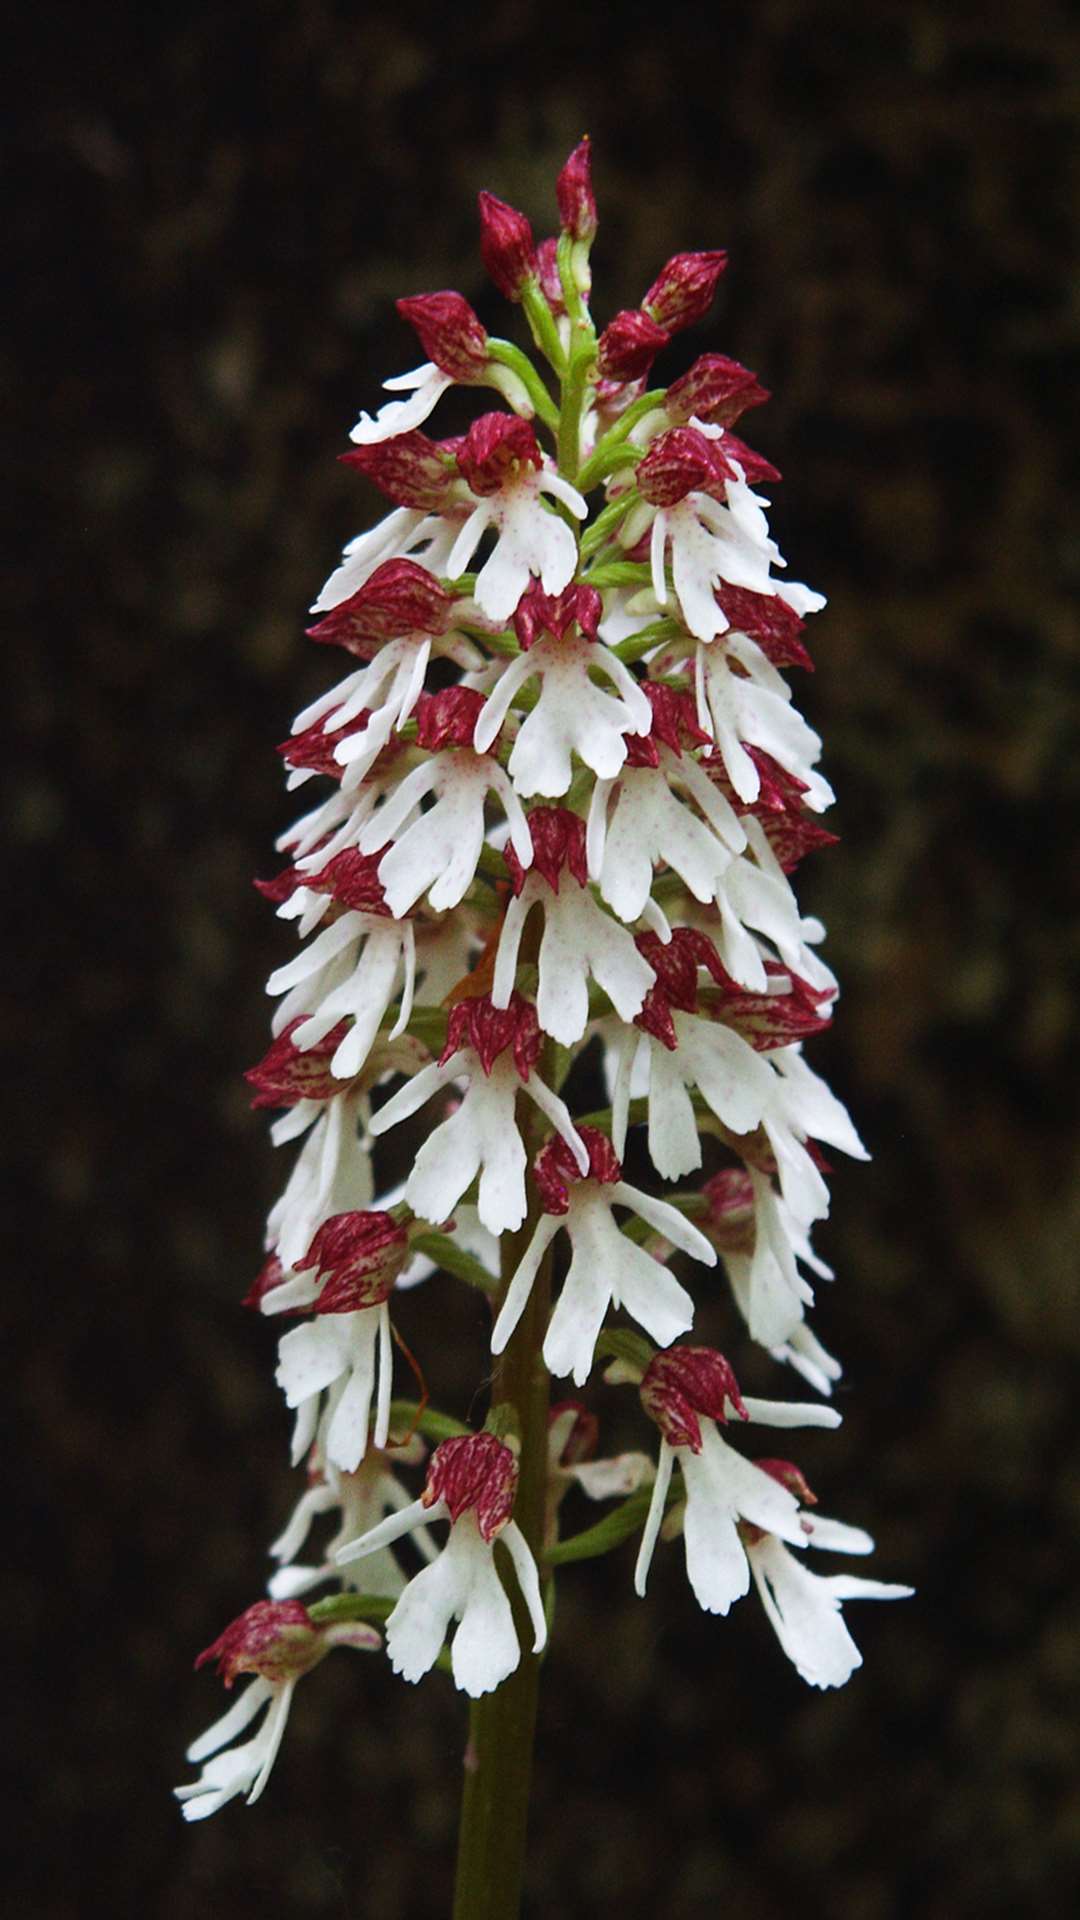 The rare lady orchid. Picture: David Nicholls.